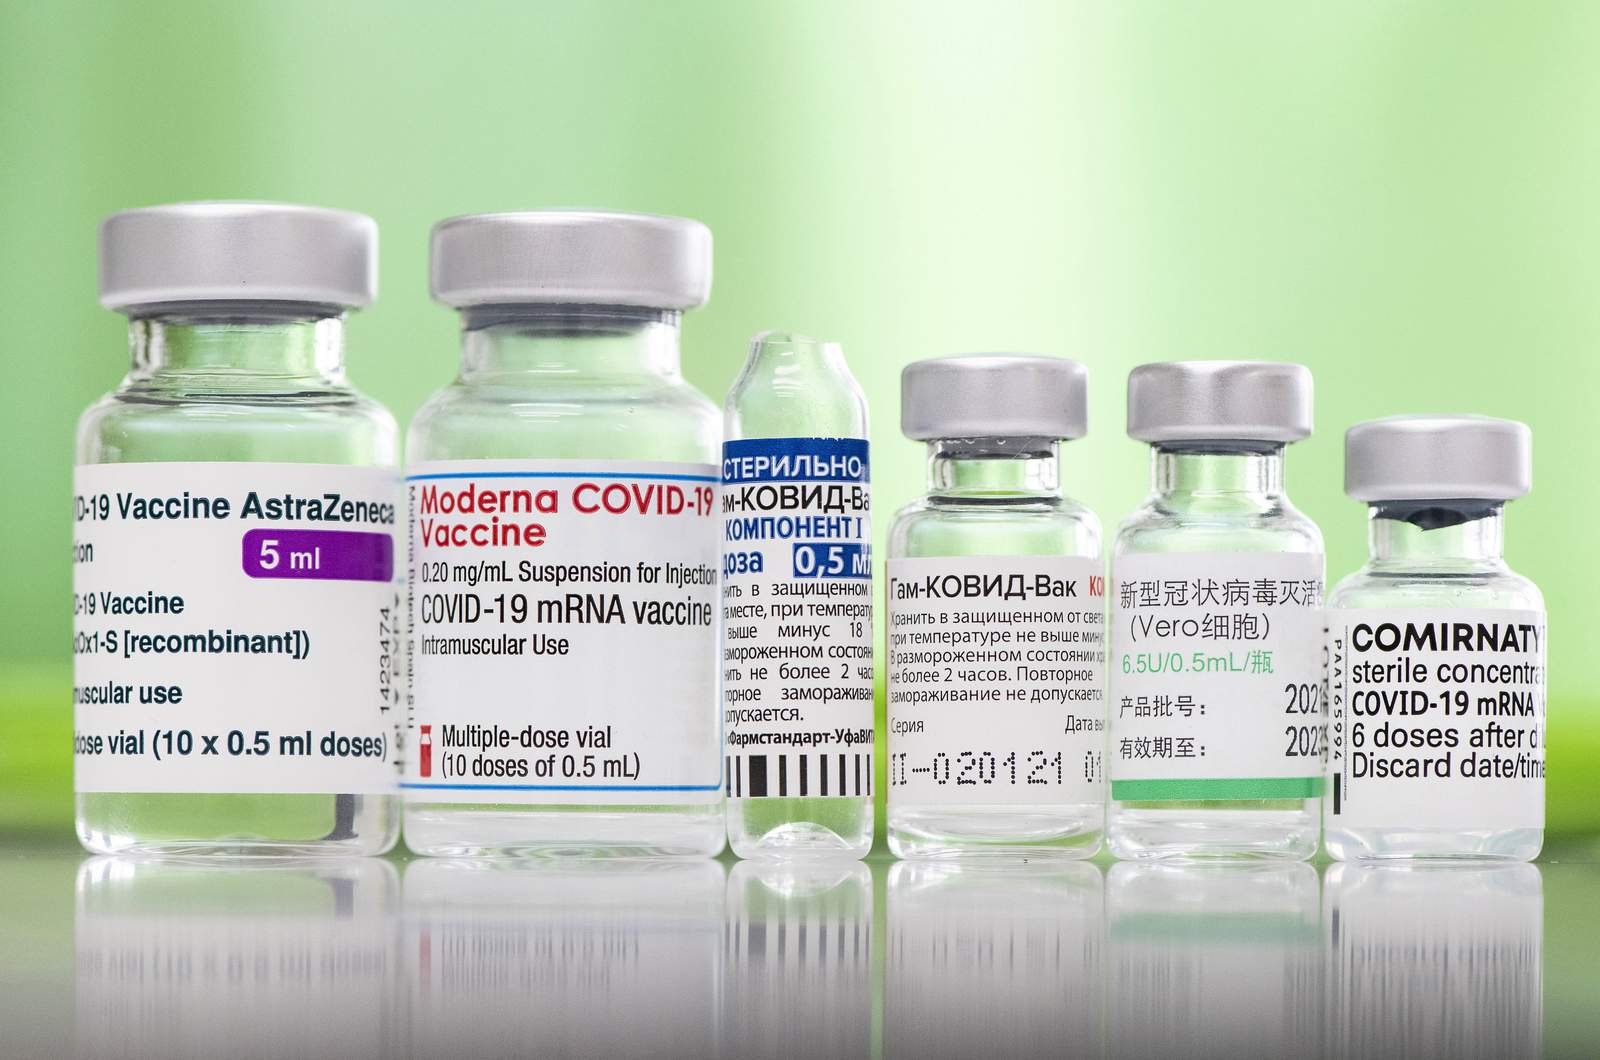 Report: Fauci says US may not need AstraZeneca COVID vaccine to reach goal